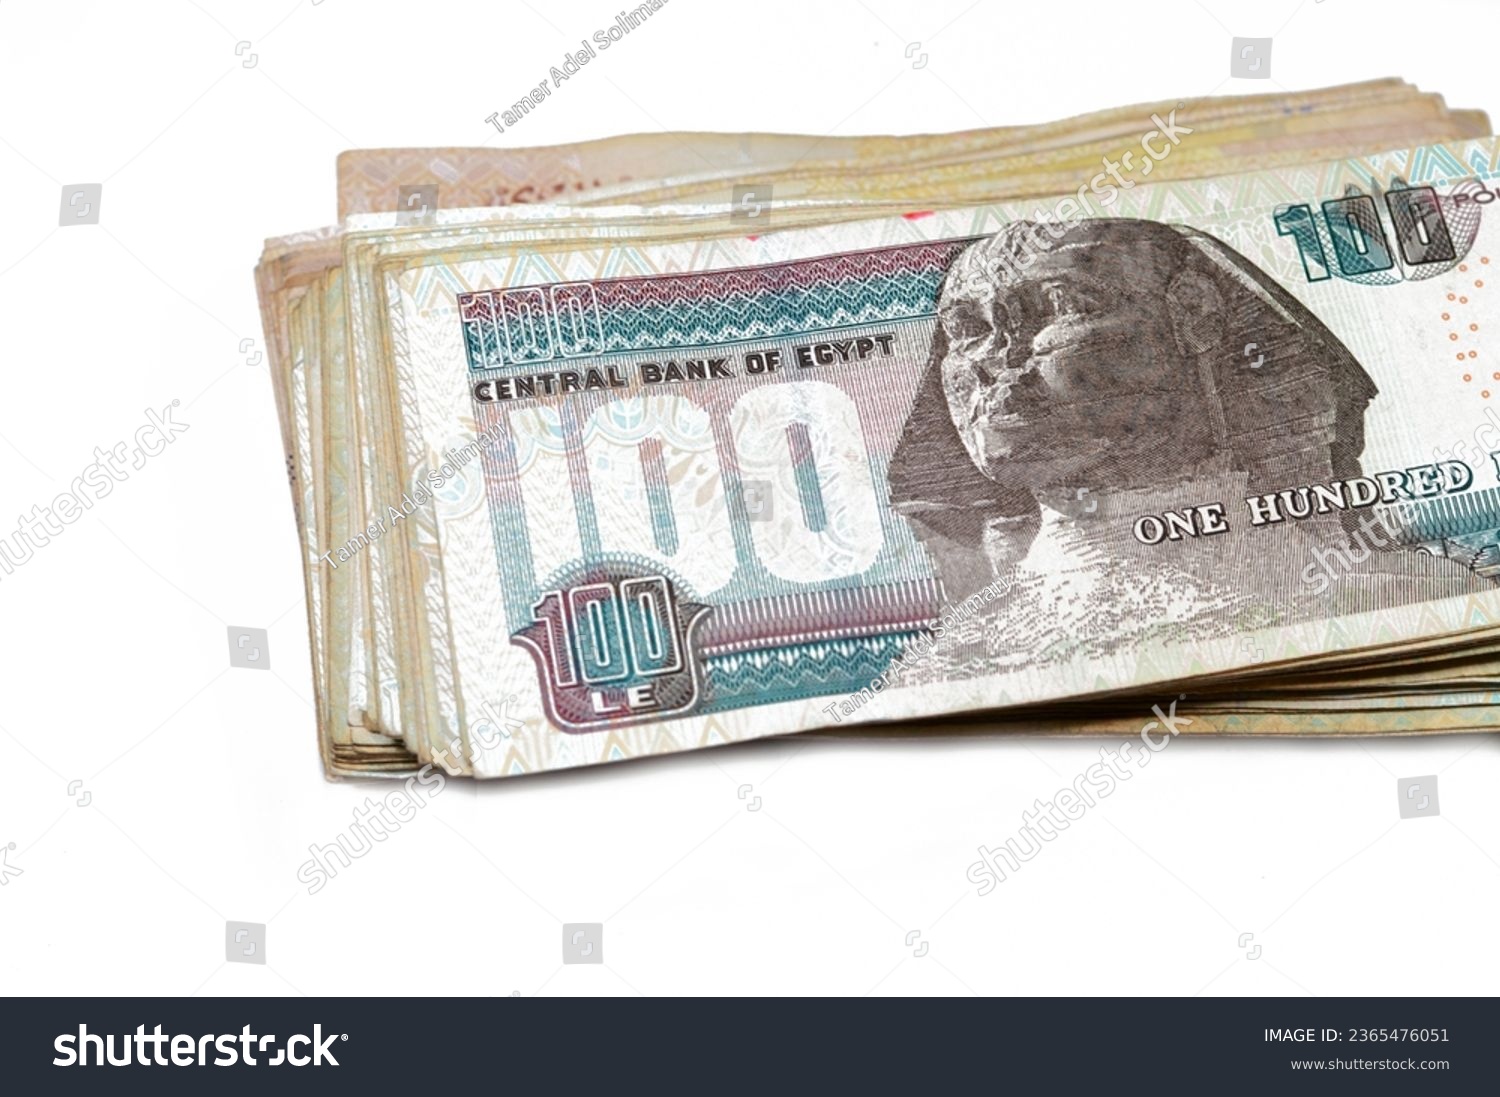 Stack of Egyptian currency of 100 EGP LE one hundred Egyptian pound bills, spending, giving and using money concept, paying and buying using banknotes with Sultan Hassan mosque and the Sphinx #2365476051